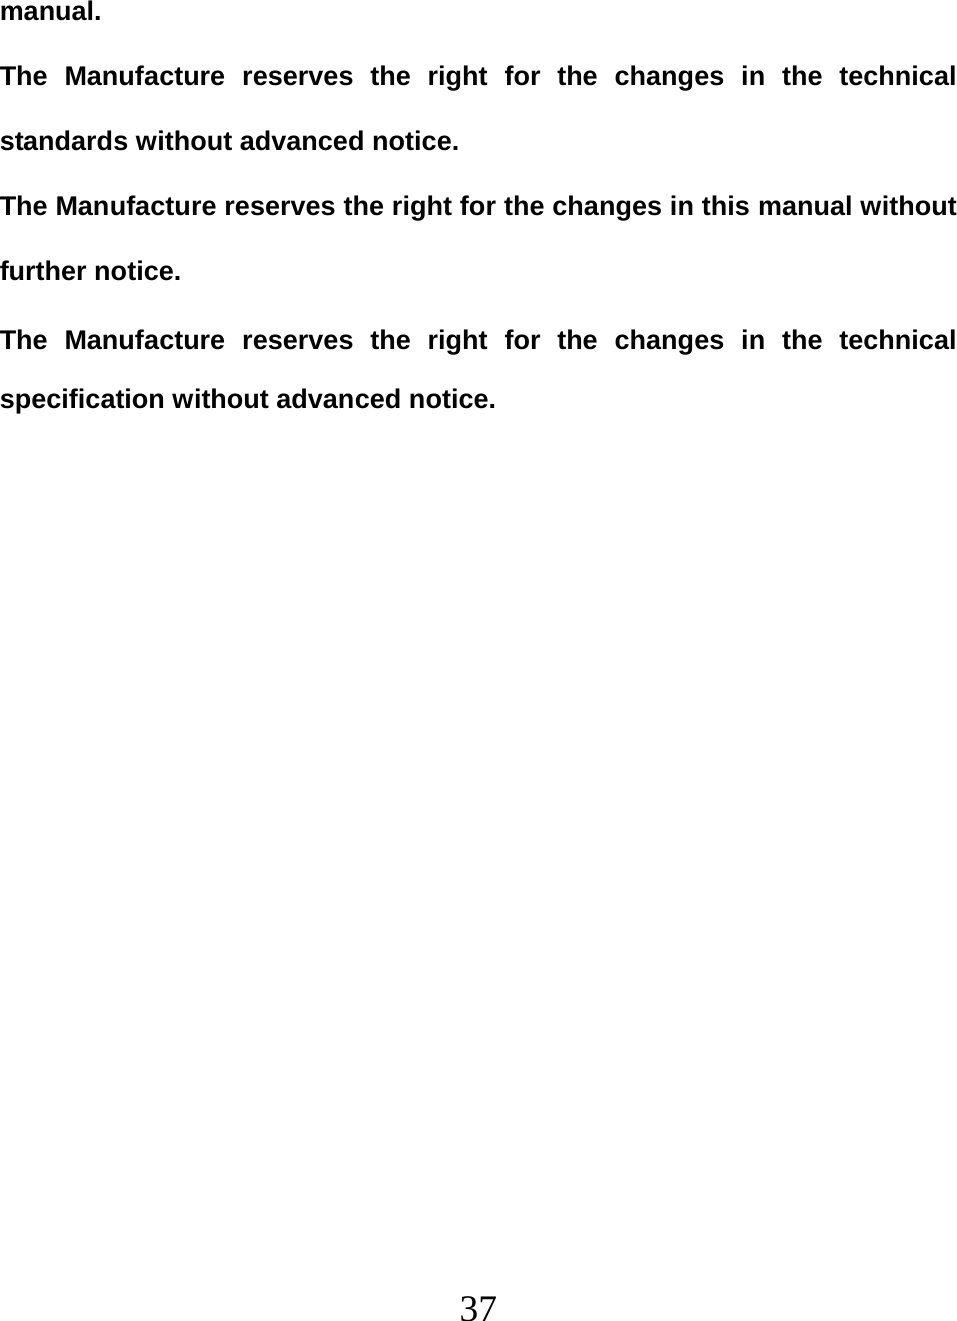   37manual. The Manufacture reserves the right for the changes in the technical standards without advanced notice. The Manufacture reserves the right for the changes in this manual without further notice. The Manufacture reserves the right for the changes in the technical specification without advanced notice.  